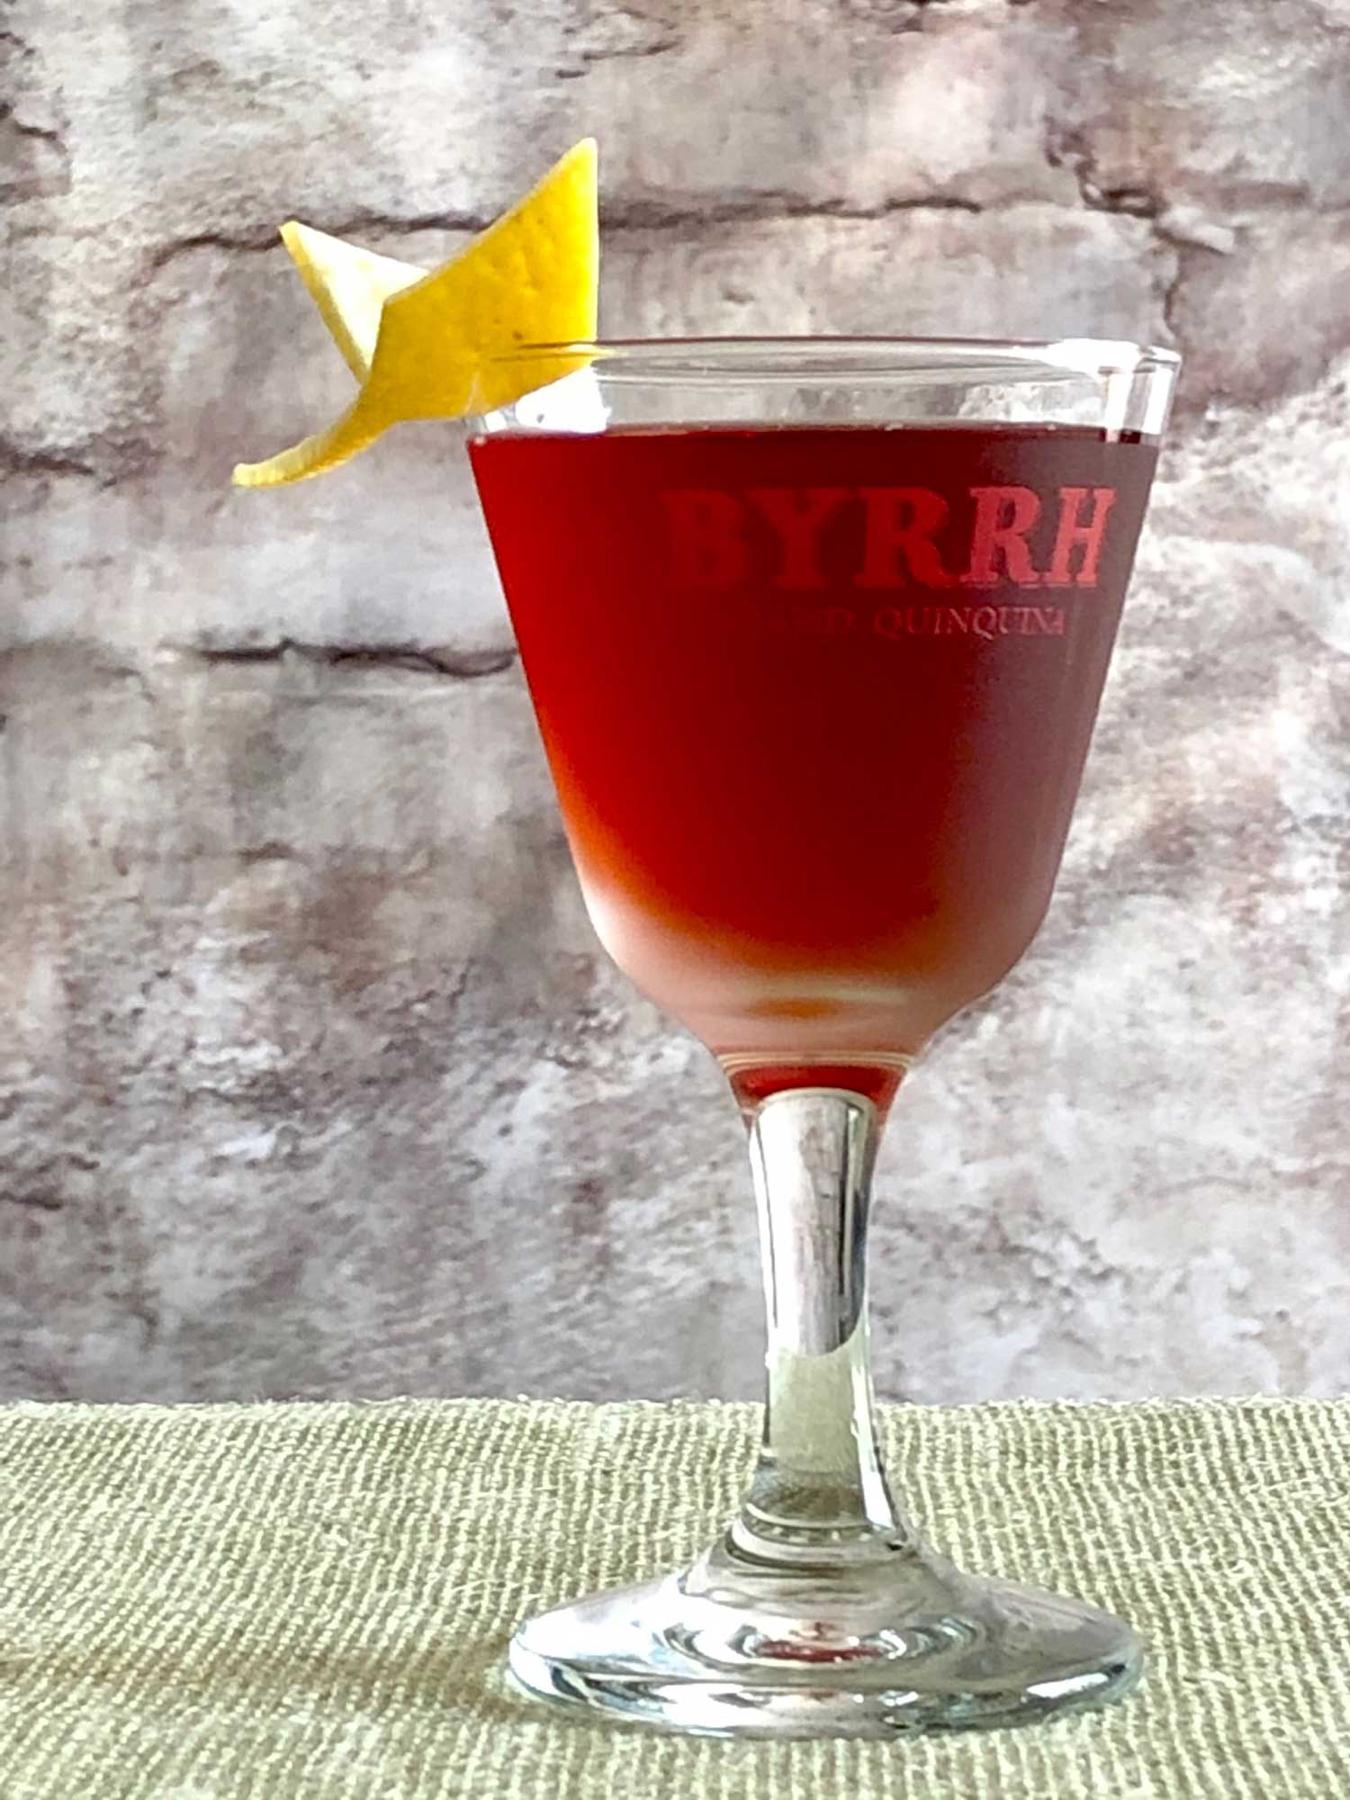 An example of the Betsy Ross, the mixed drink (drink), by David Embury, The Fine Art of Mixing Drinks, featuring grape brandy, Byrrh Grand Quinquina, curaçao, Angostura bitters, and lemon twist; photo by Lee Edwards